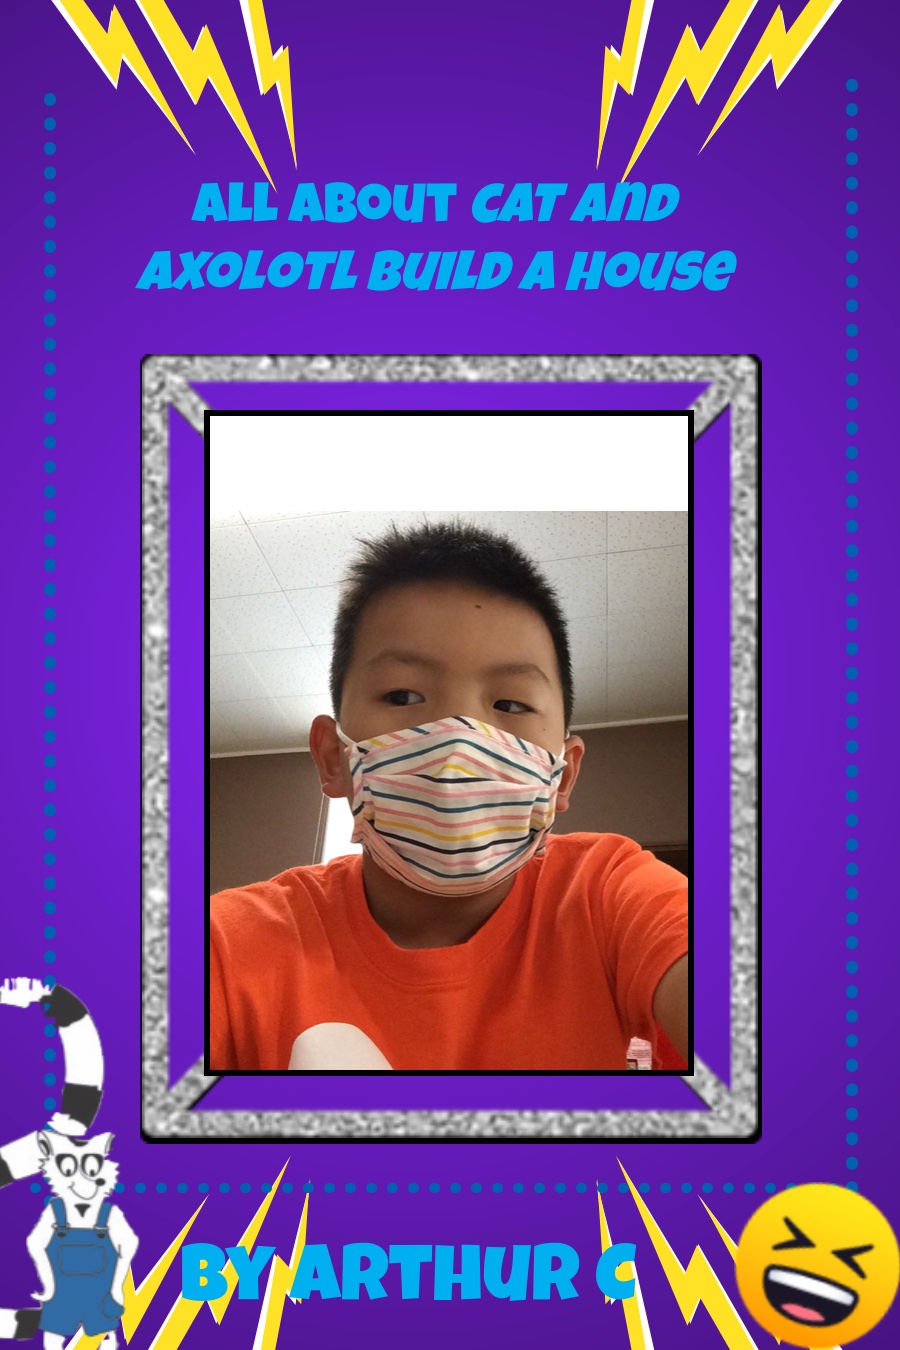 All About Cat and Axolotl Build a House by Arthur C